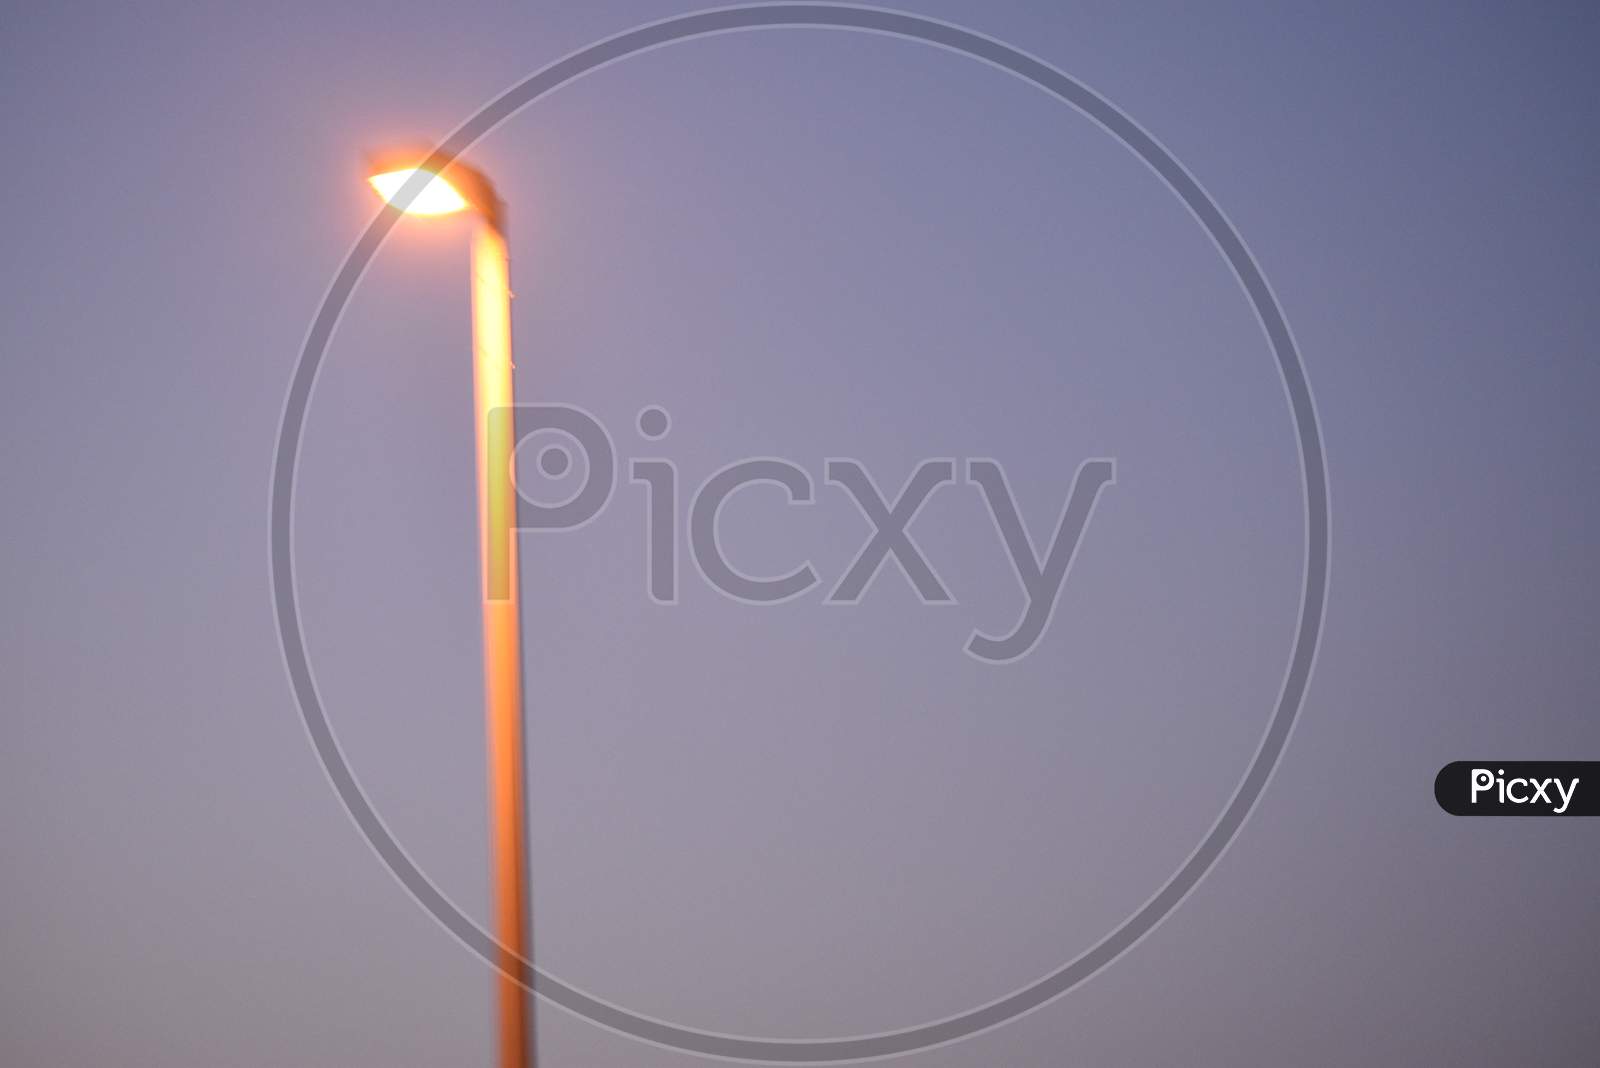 Road Side Street Light In The Abu Dhabi City.Evening Photography With Nikon Camera On April 2020.